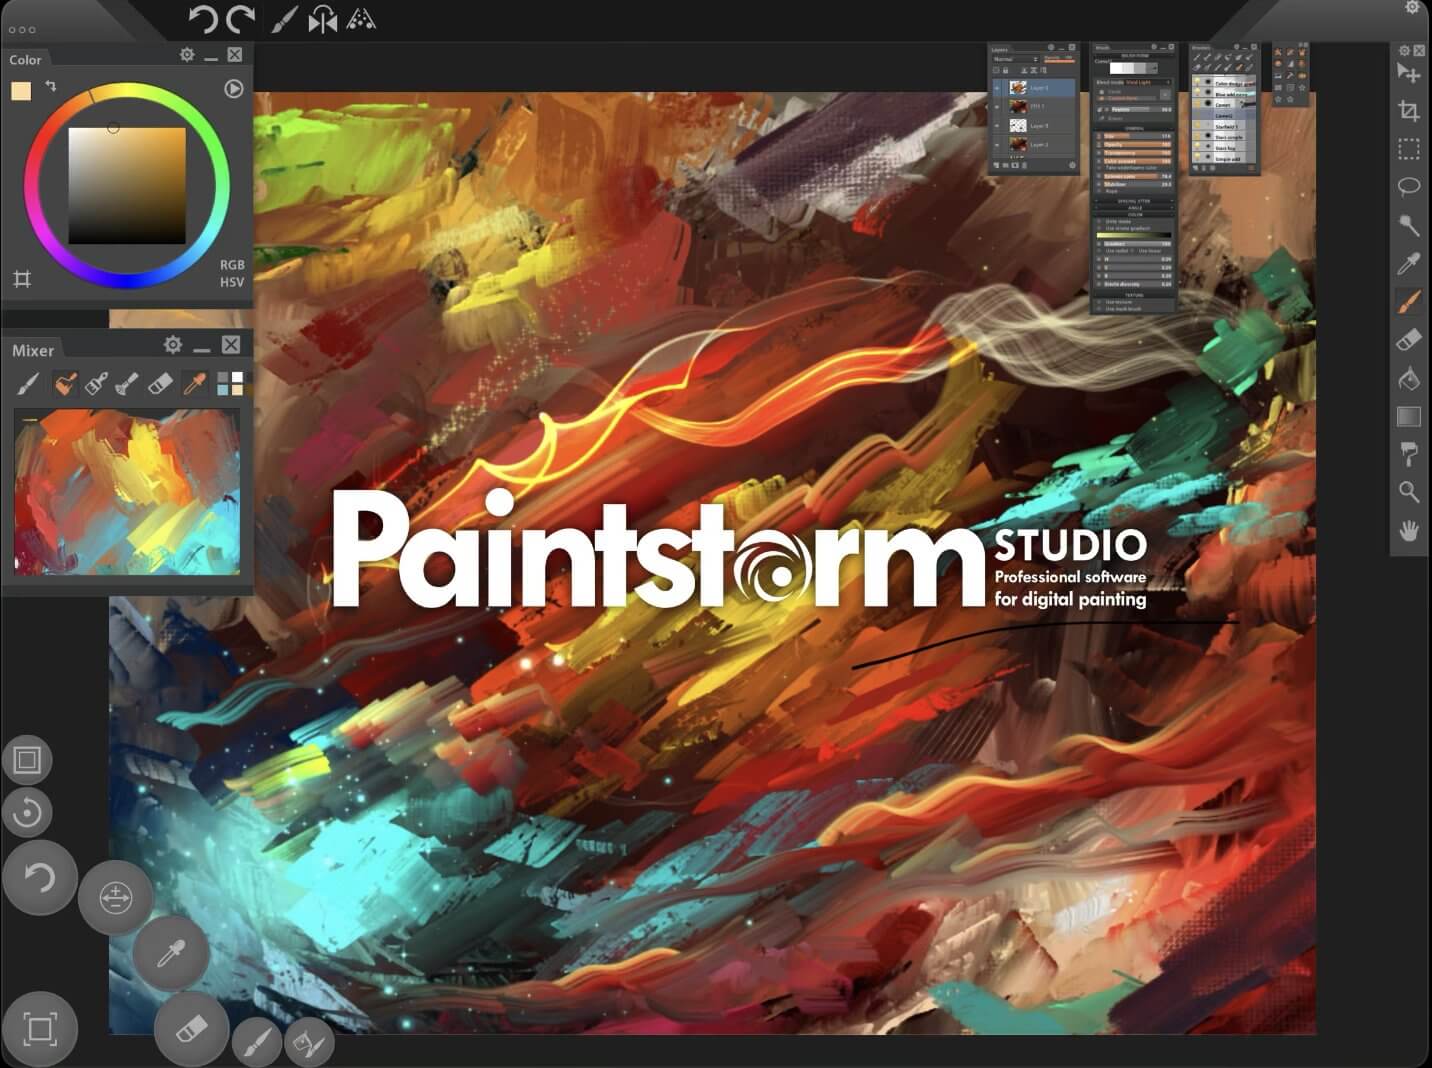 Make your mark as Monet or Seurat, with Paintstorm Pro and Apple Pencil